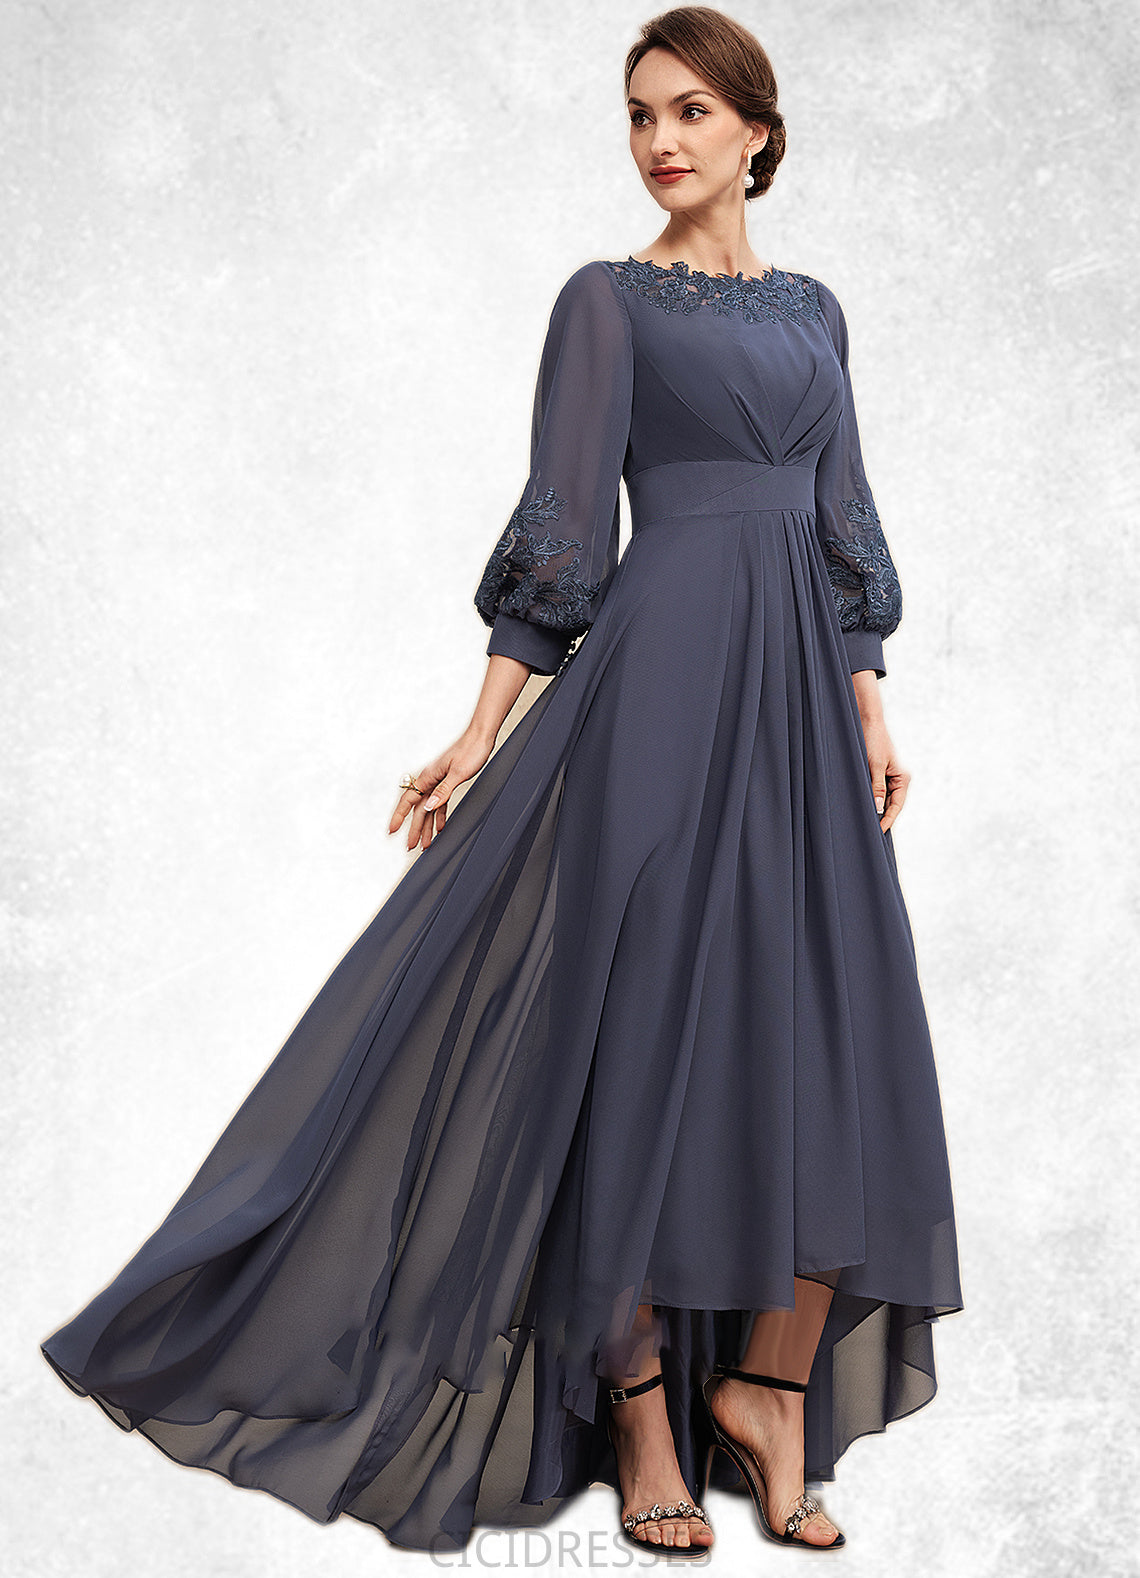 Thalia A-Line Scoop Neck Asymmetrical Chiffon Mother of the Bride Dress With Ruffle Appliques Lace CIC8126P0014592